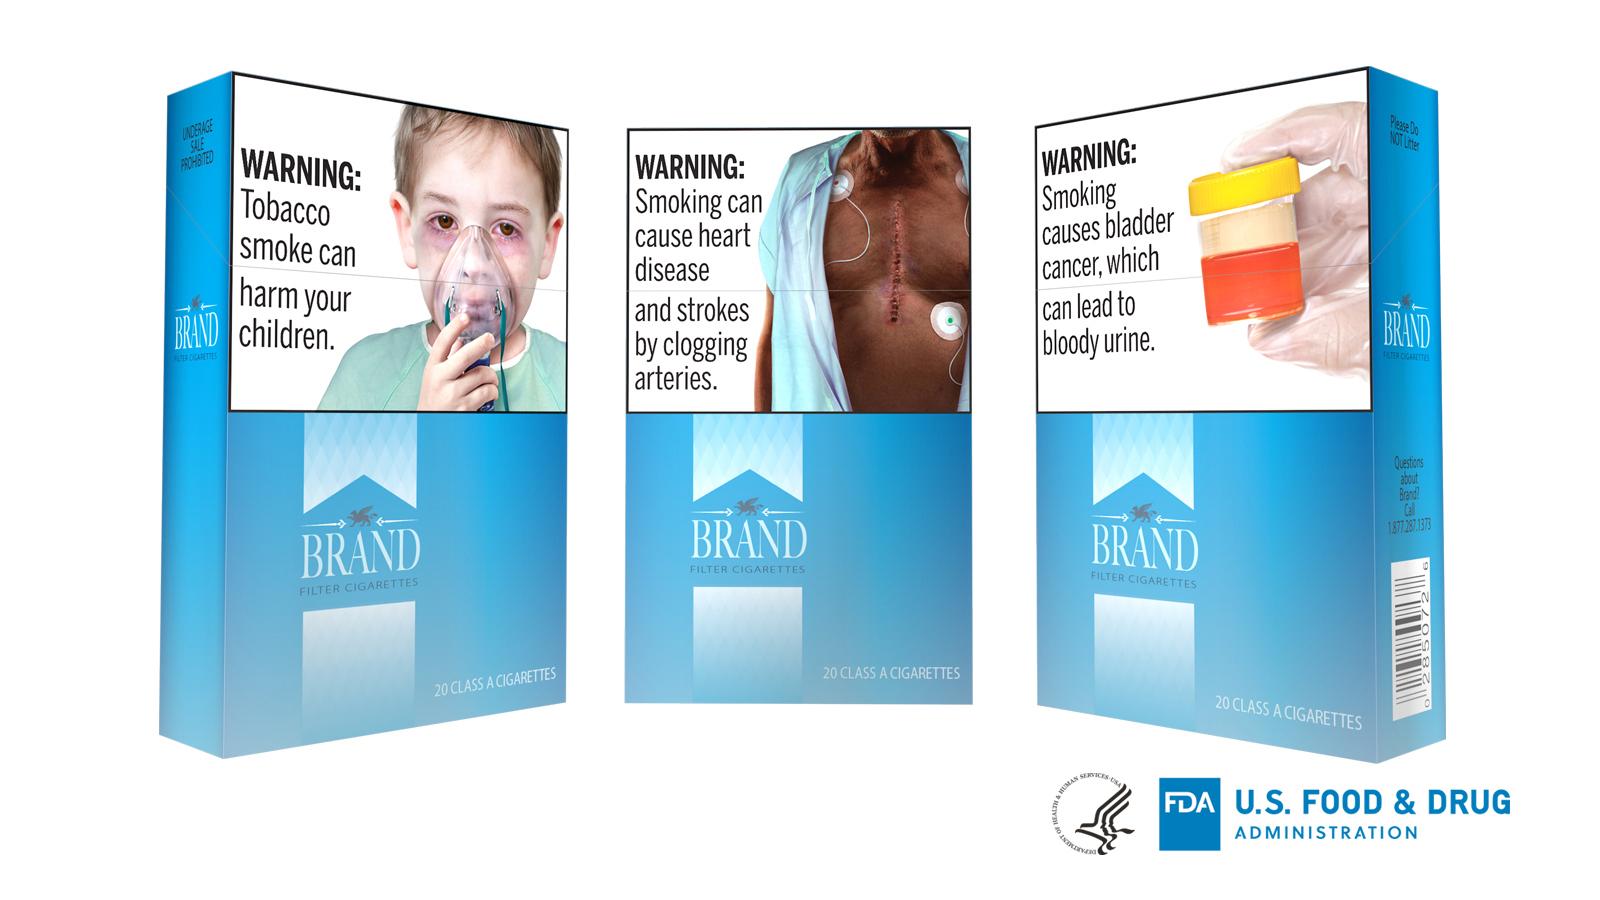 This undated image provided by the U.S. Food and Drug Administration shows proposed graphic warnings that would appear on cigarettes. The Food and Drug Administration on Thursday, Aug. 15, 2019, proposed 13 new large, graphic warnings that would appear on all cigarettes, including images of cancerous tumors, diseased lungs and bloody urine. (FDA via AP)